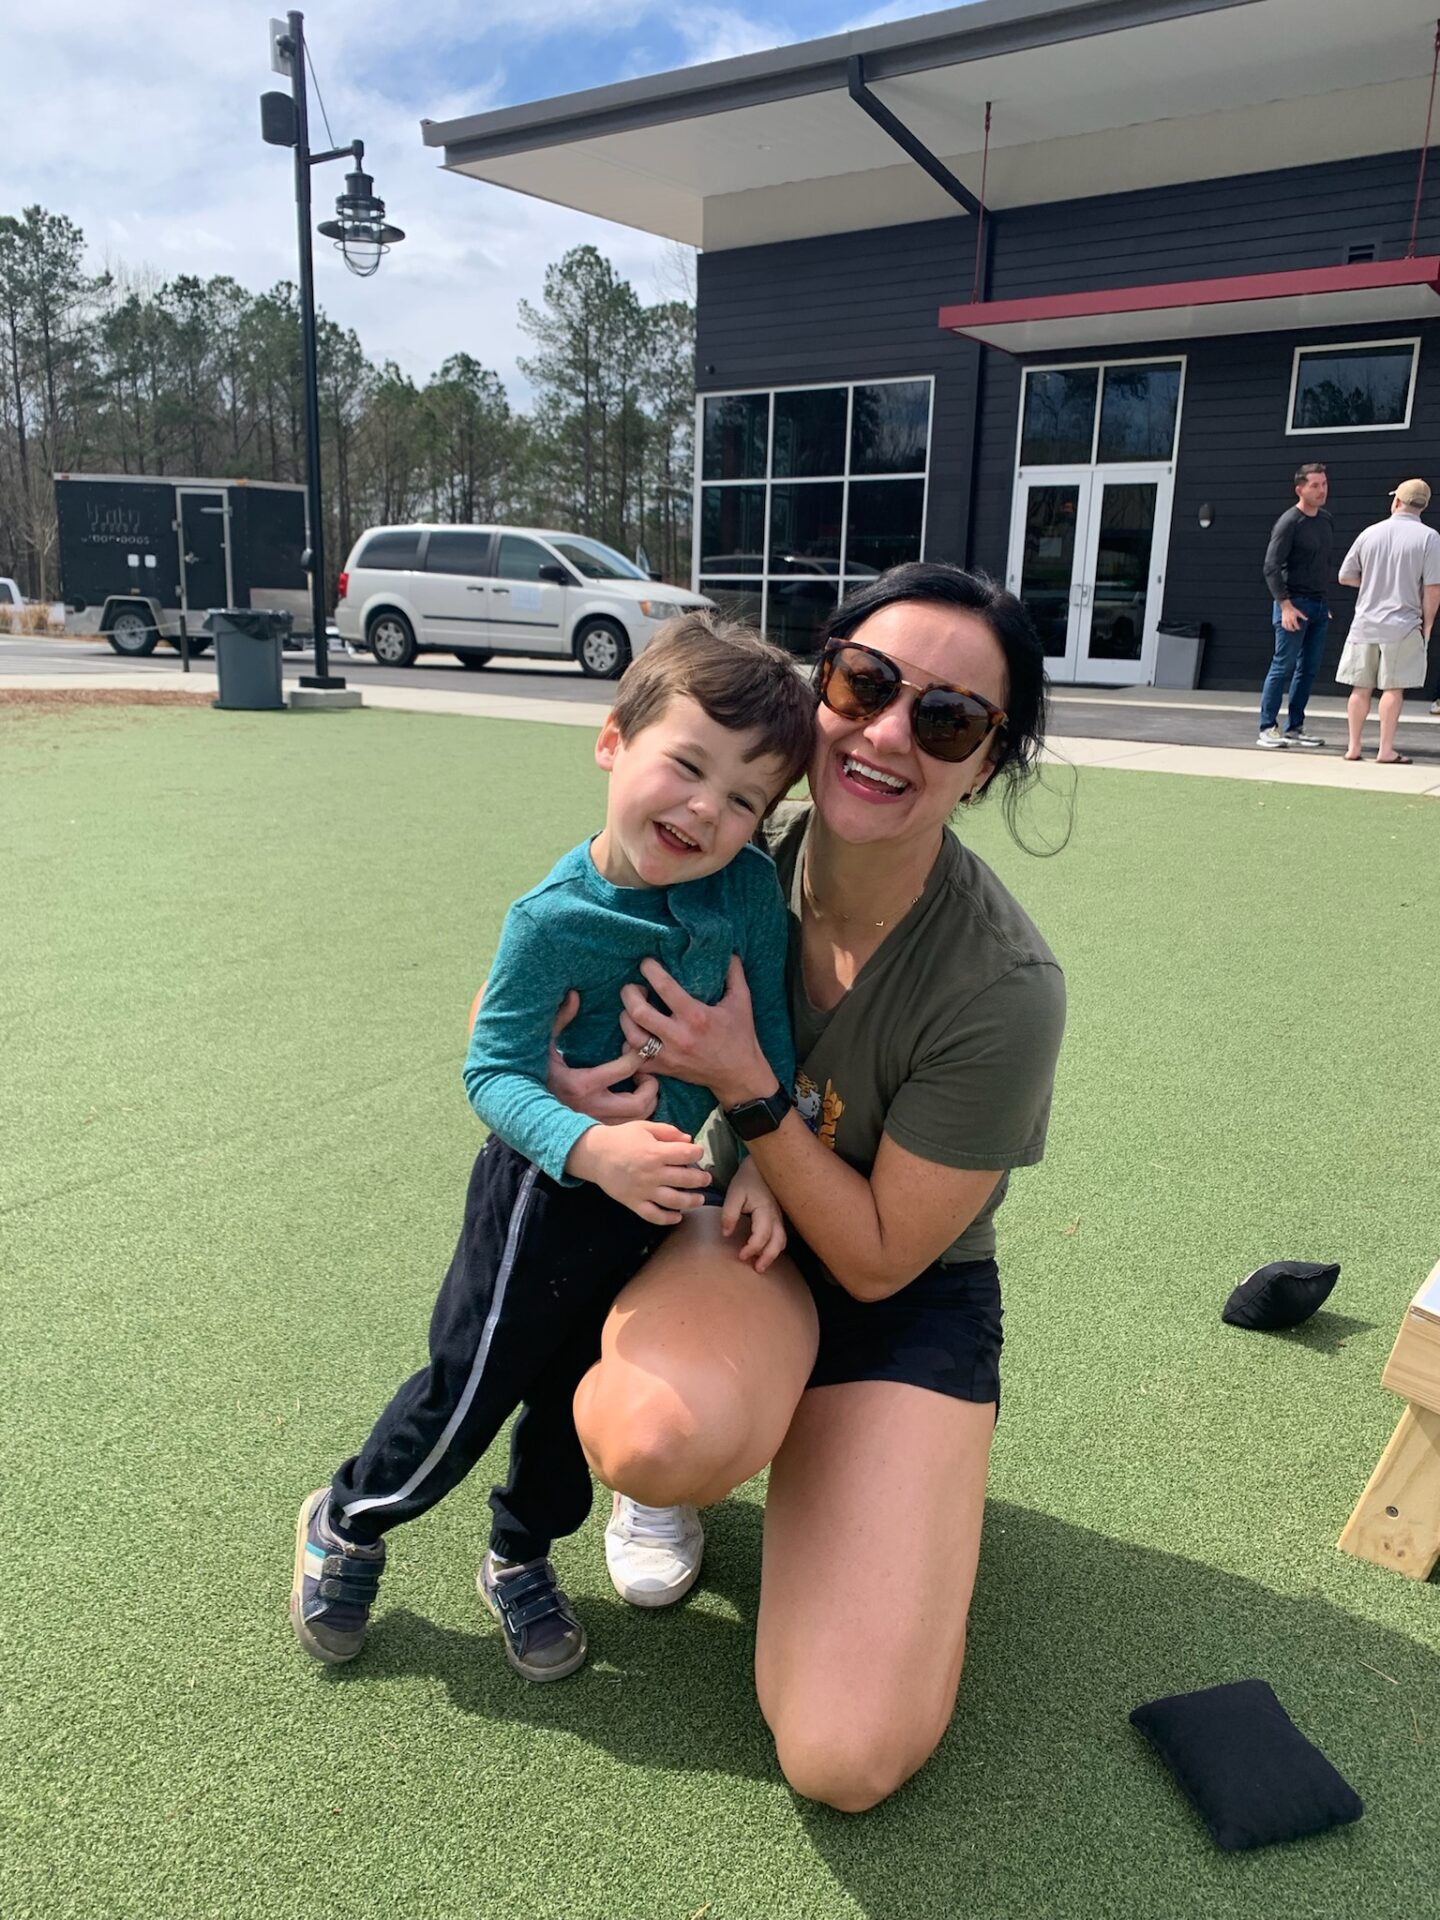 Mom + lifestyle blogger, My Life Well Loved, shares her letter to her 4 year old son! Click NOW to check it out!